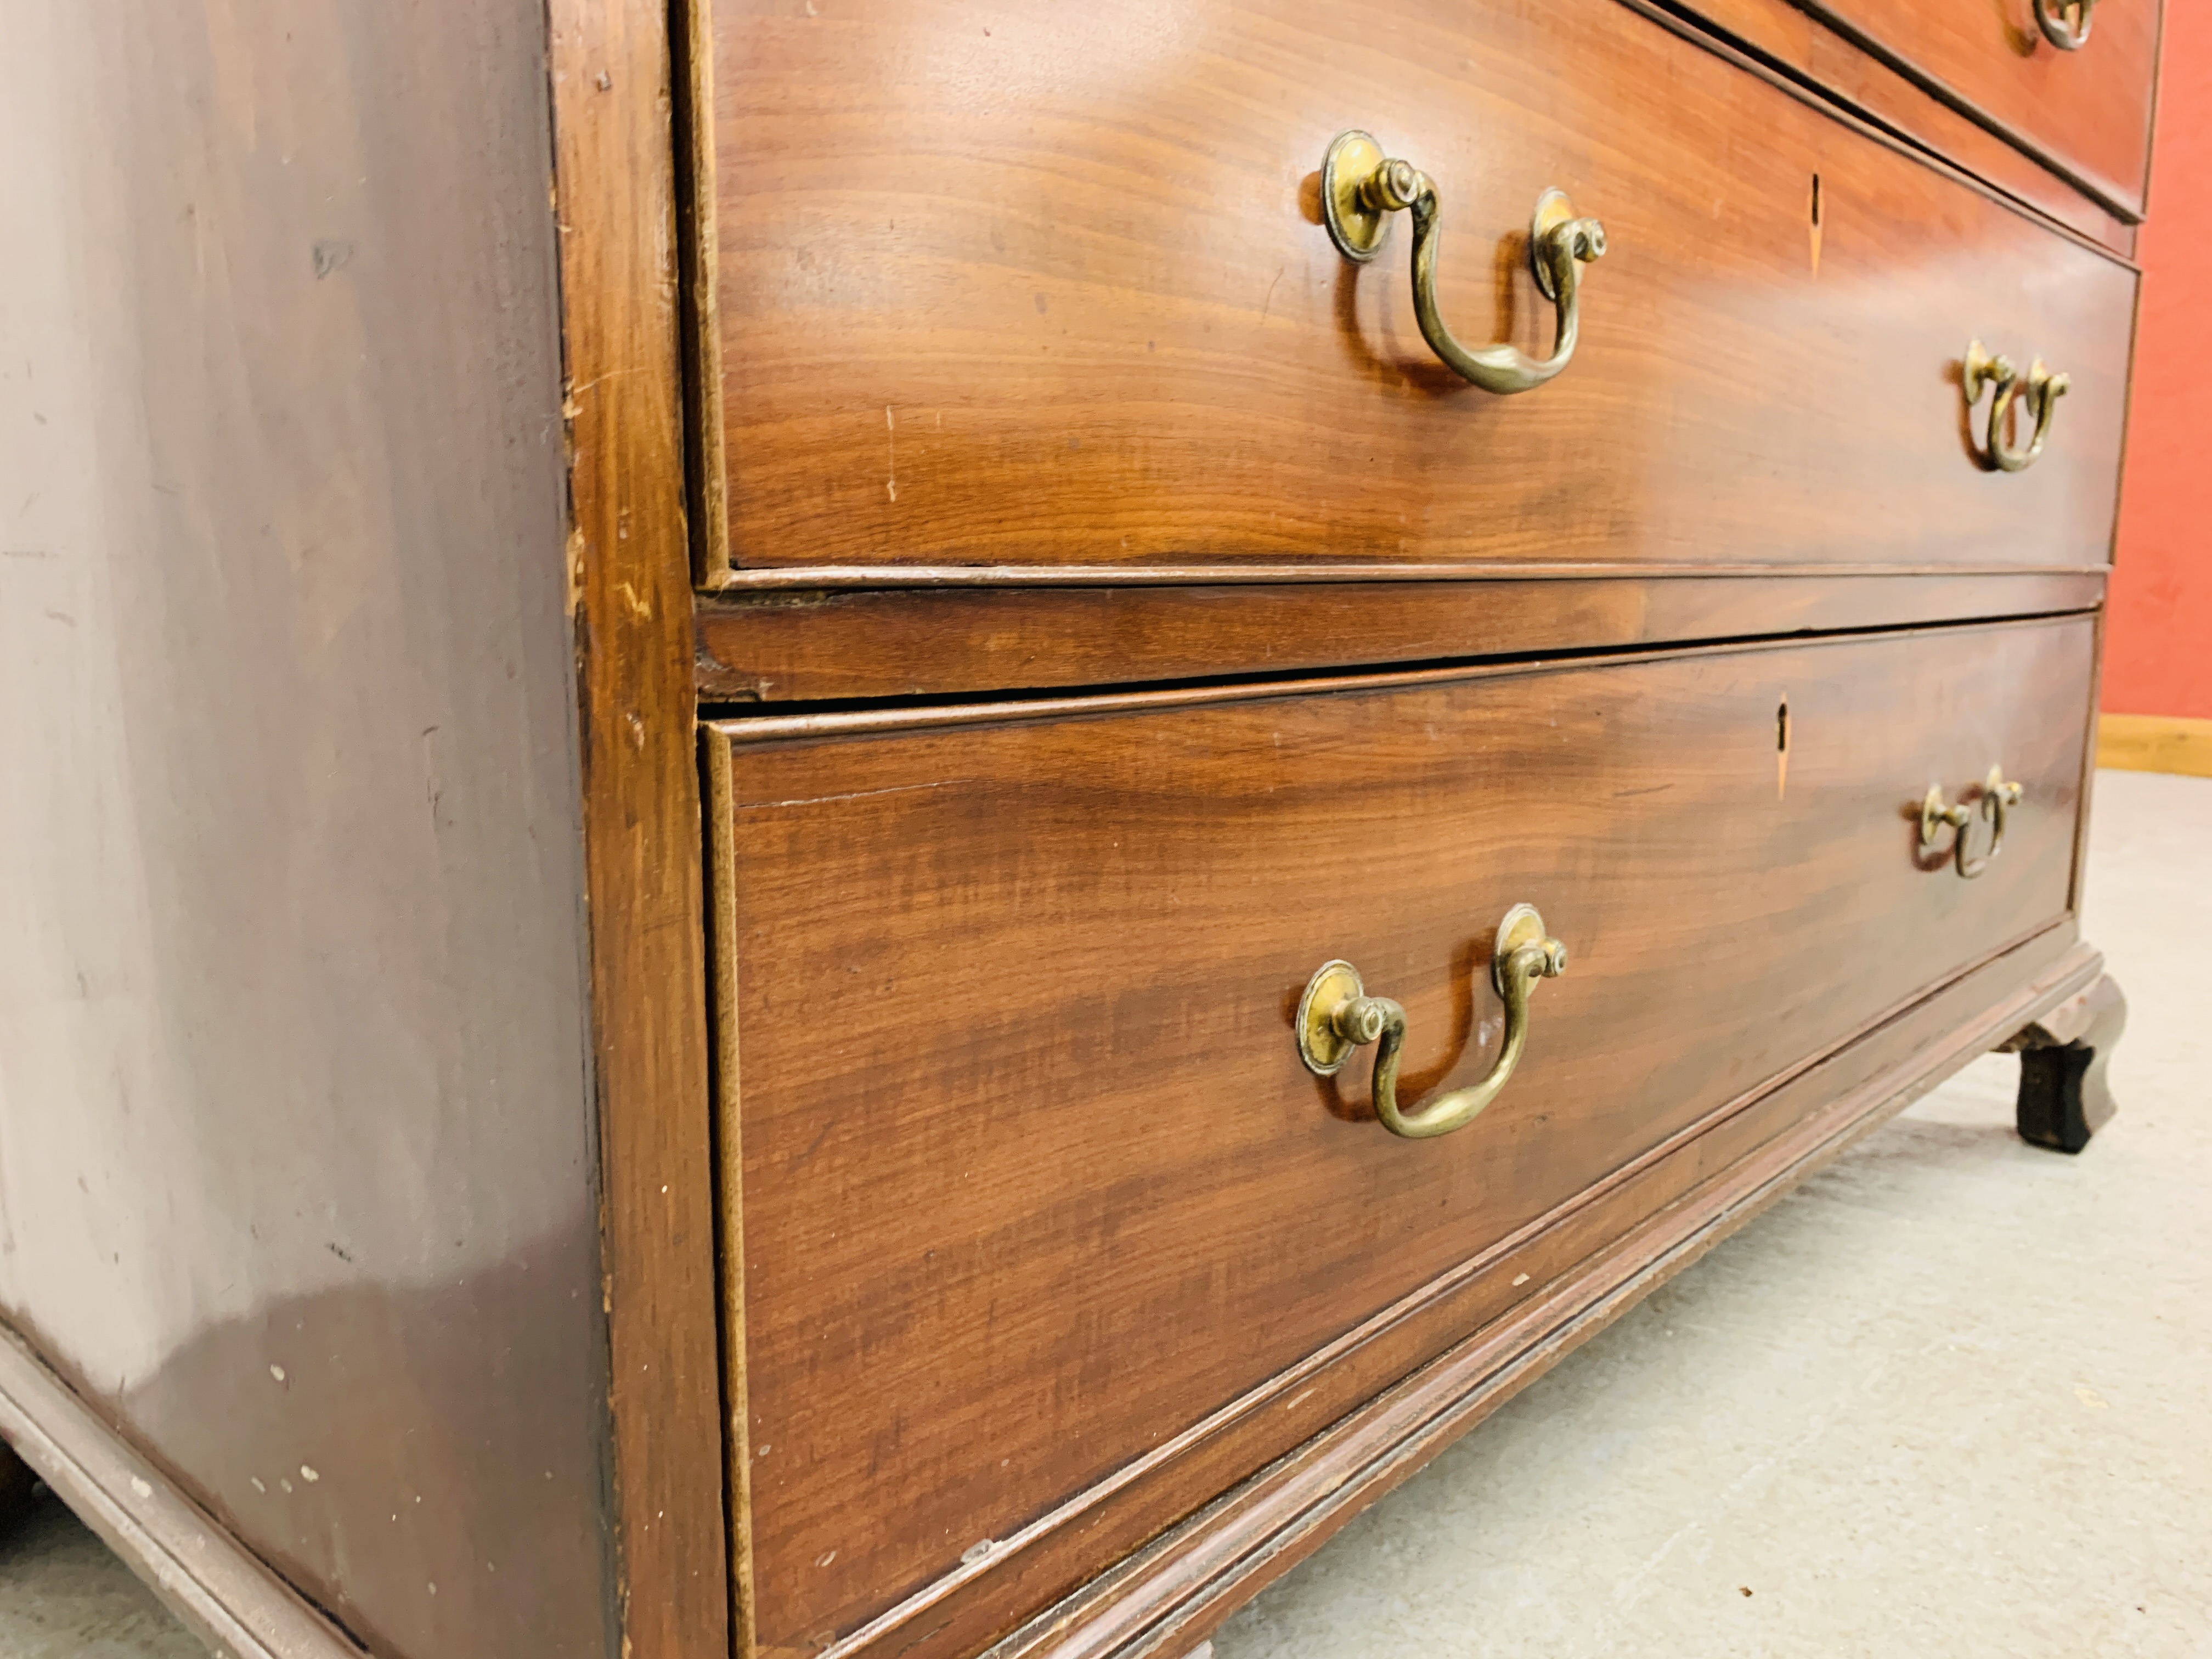 AN EARLY C19TH MAHOGANY SIX DRAWER CHEST, WIDTH 107CM. - Image 11 of 24